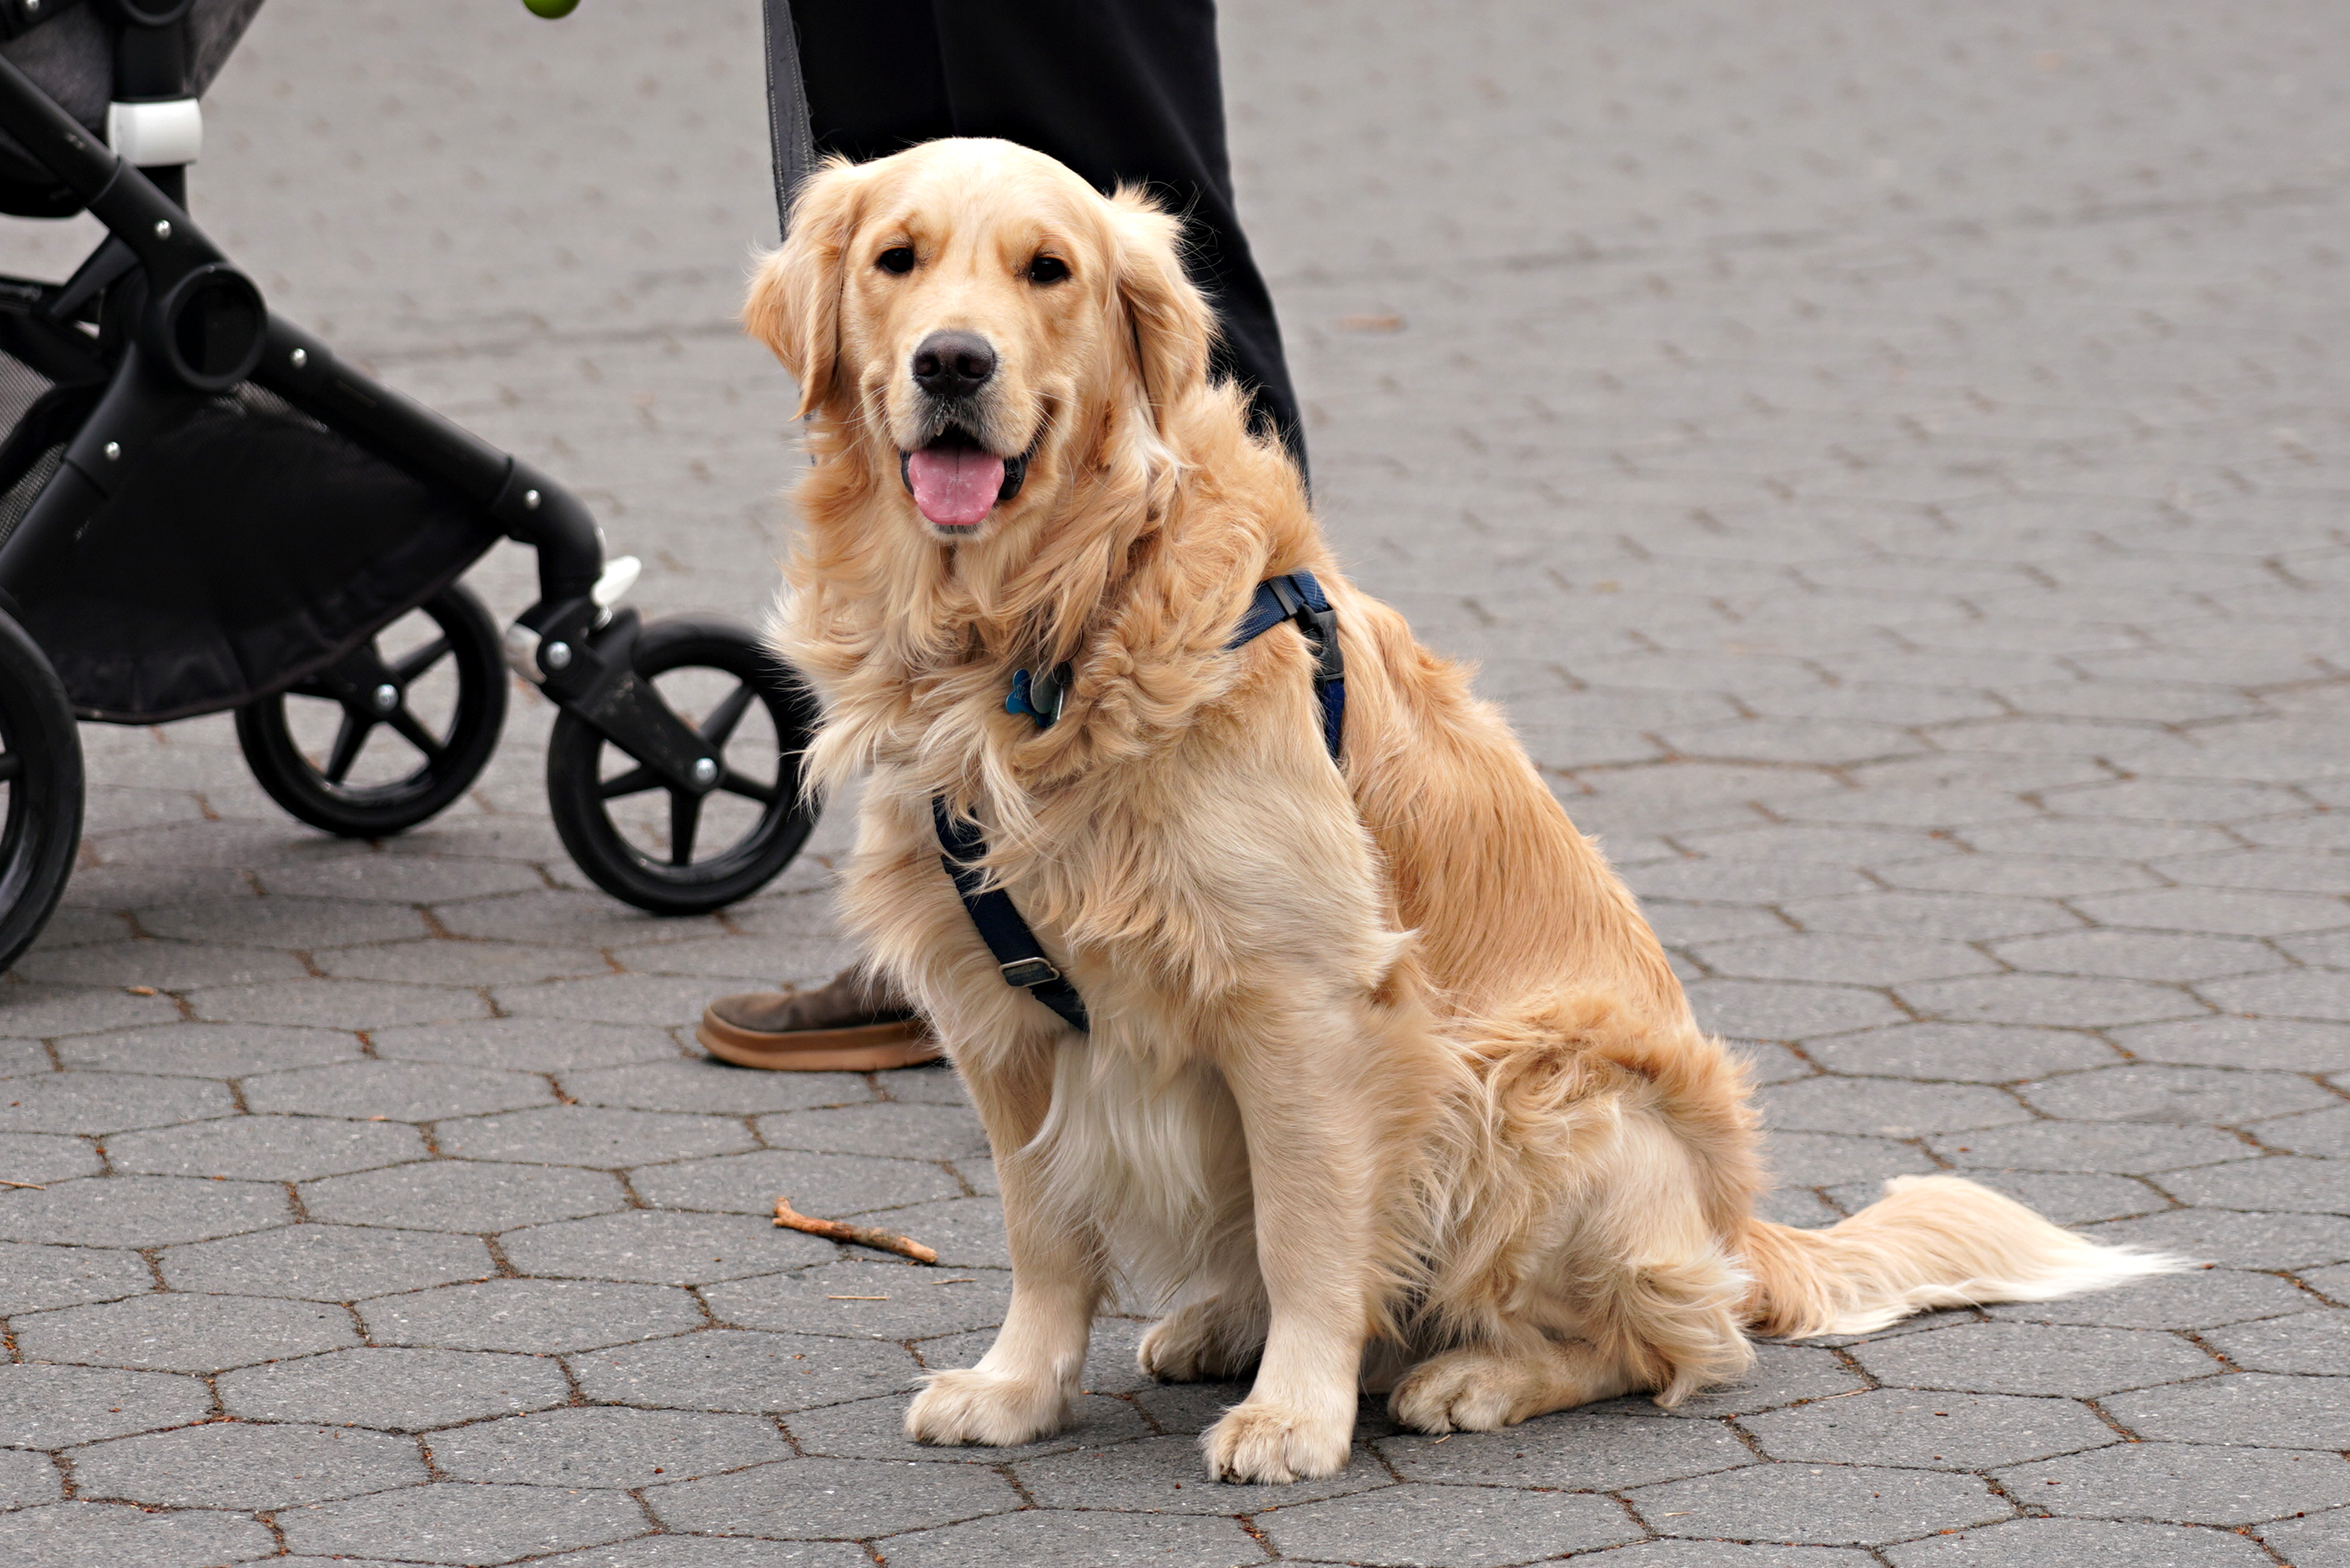 Golden Retriever in Central Park. | Source: Getty Images